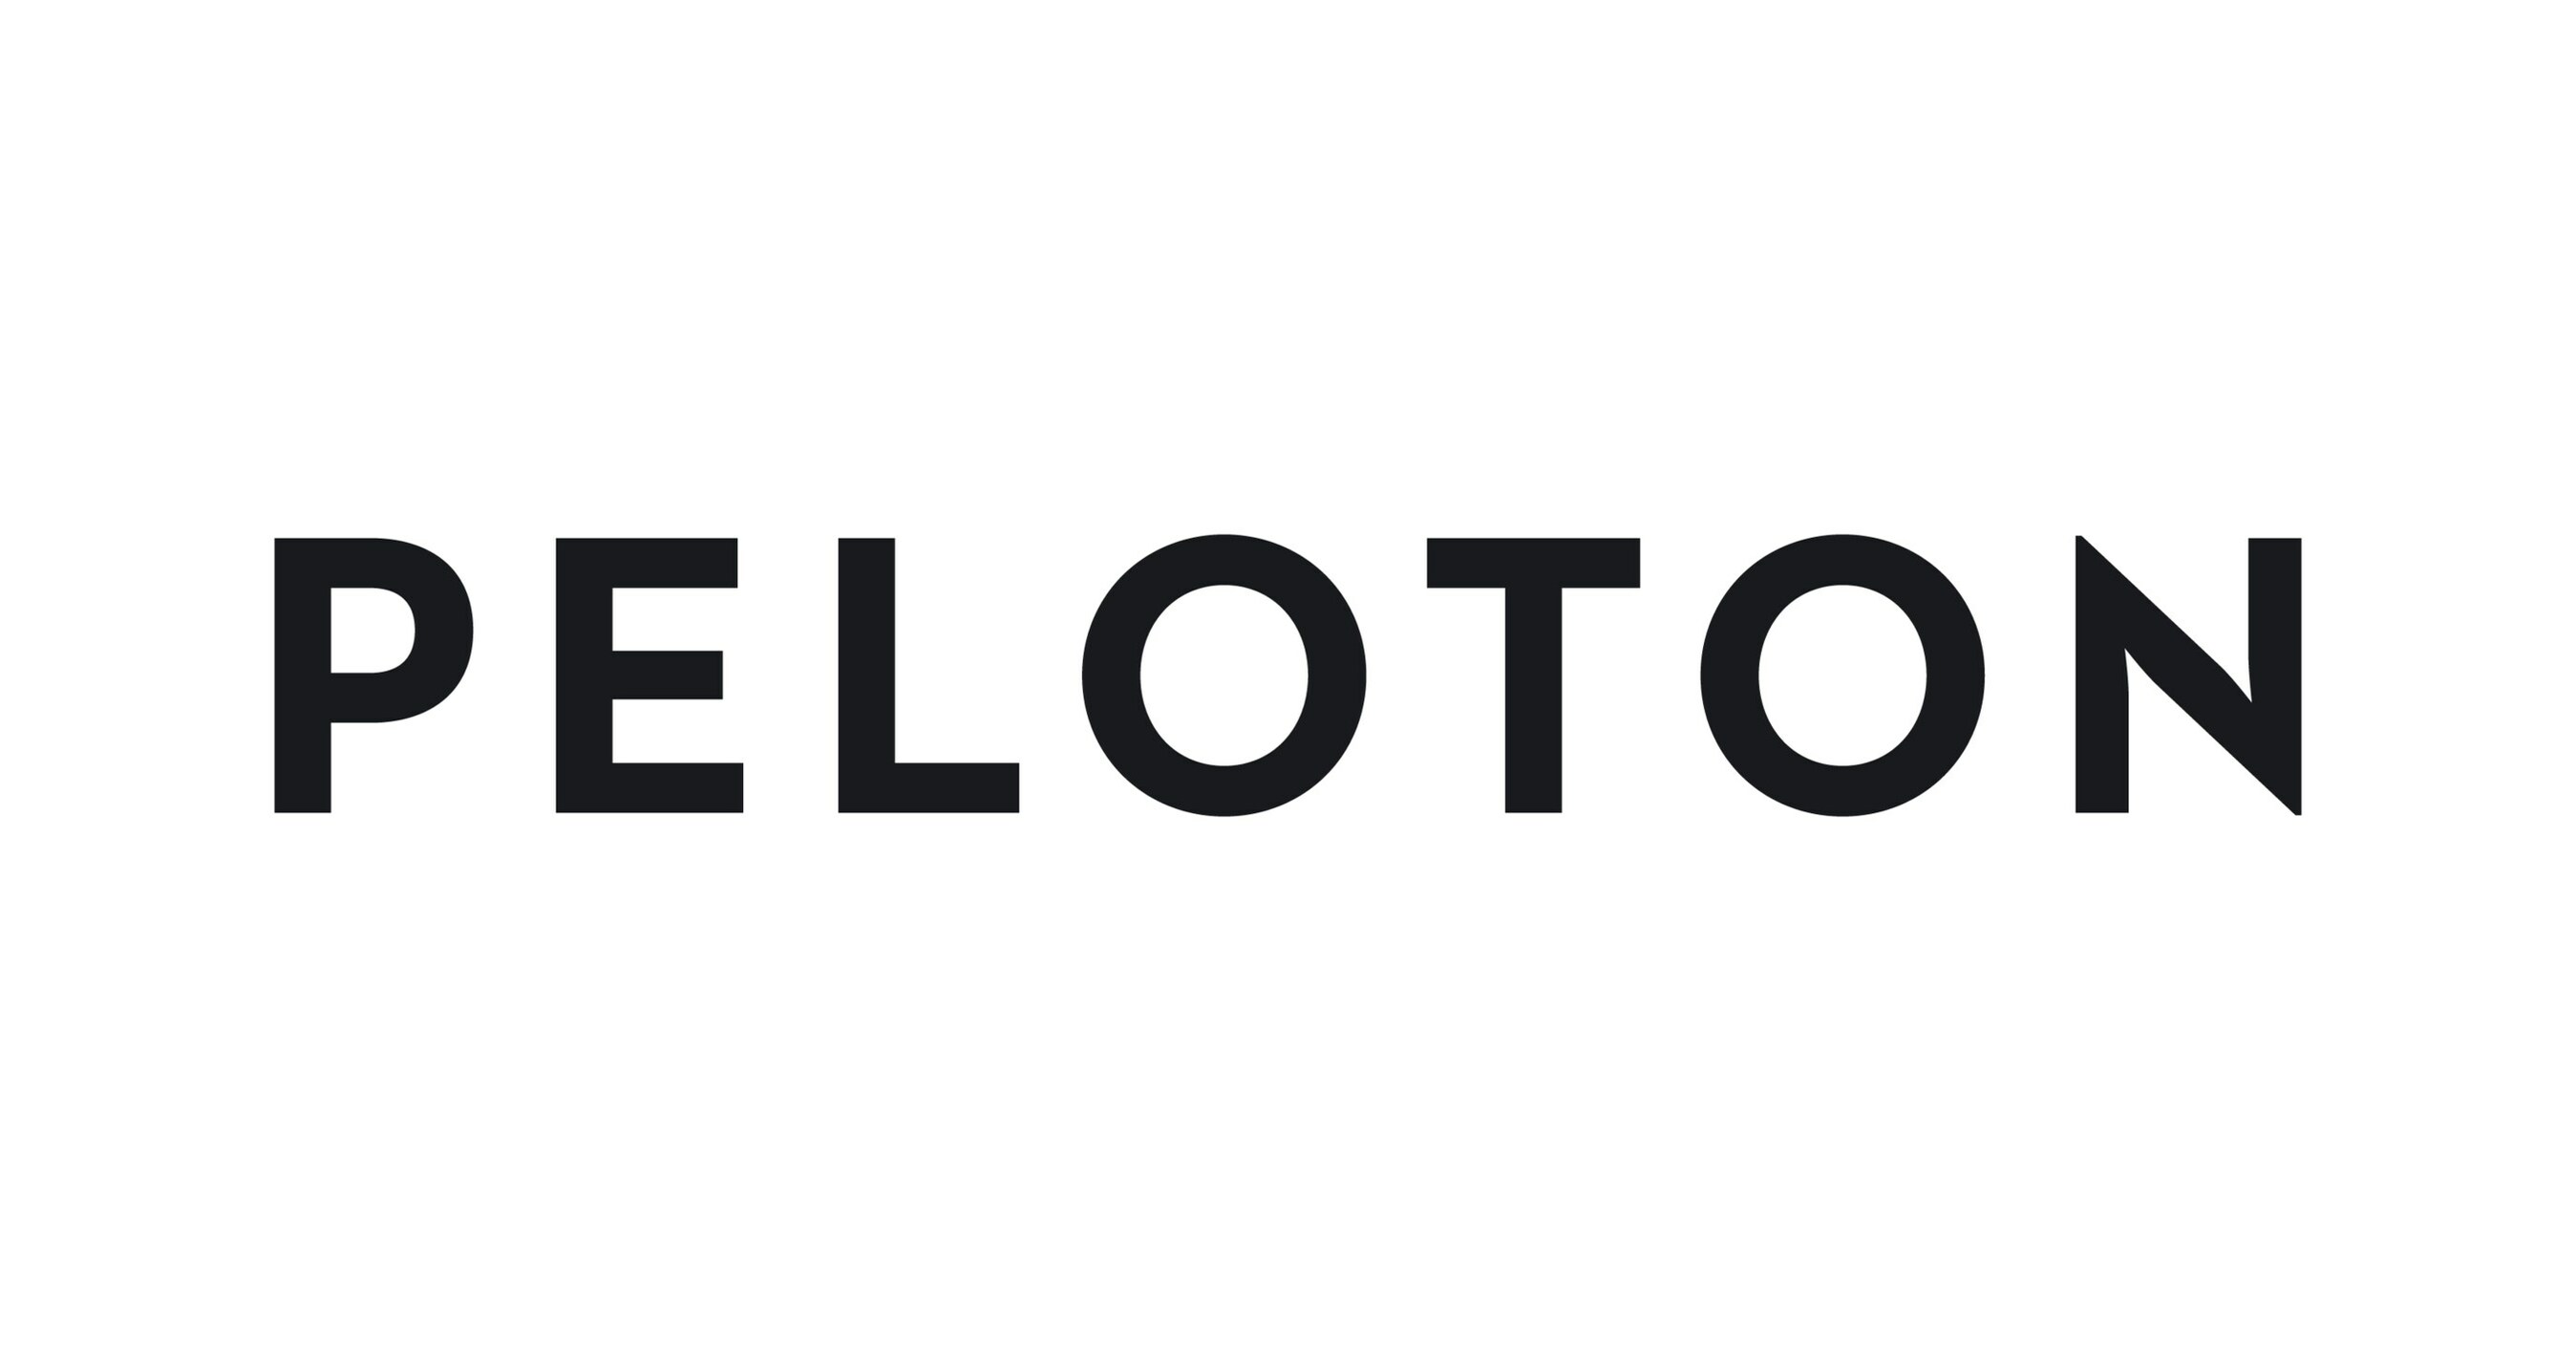 PELOTON APPOINTS NICK CALDWELL AS CHIEF PRODUCT OFFICER